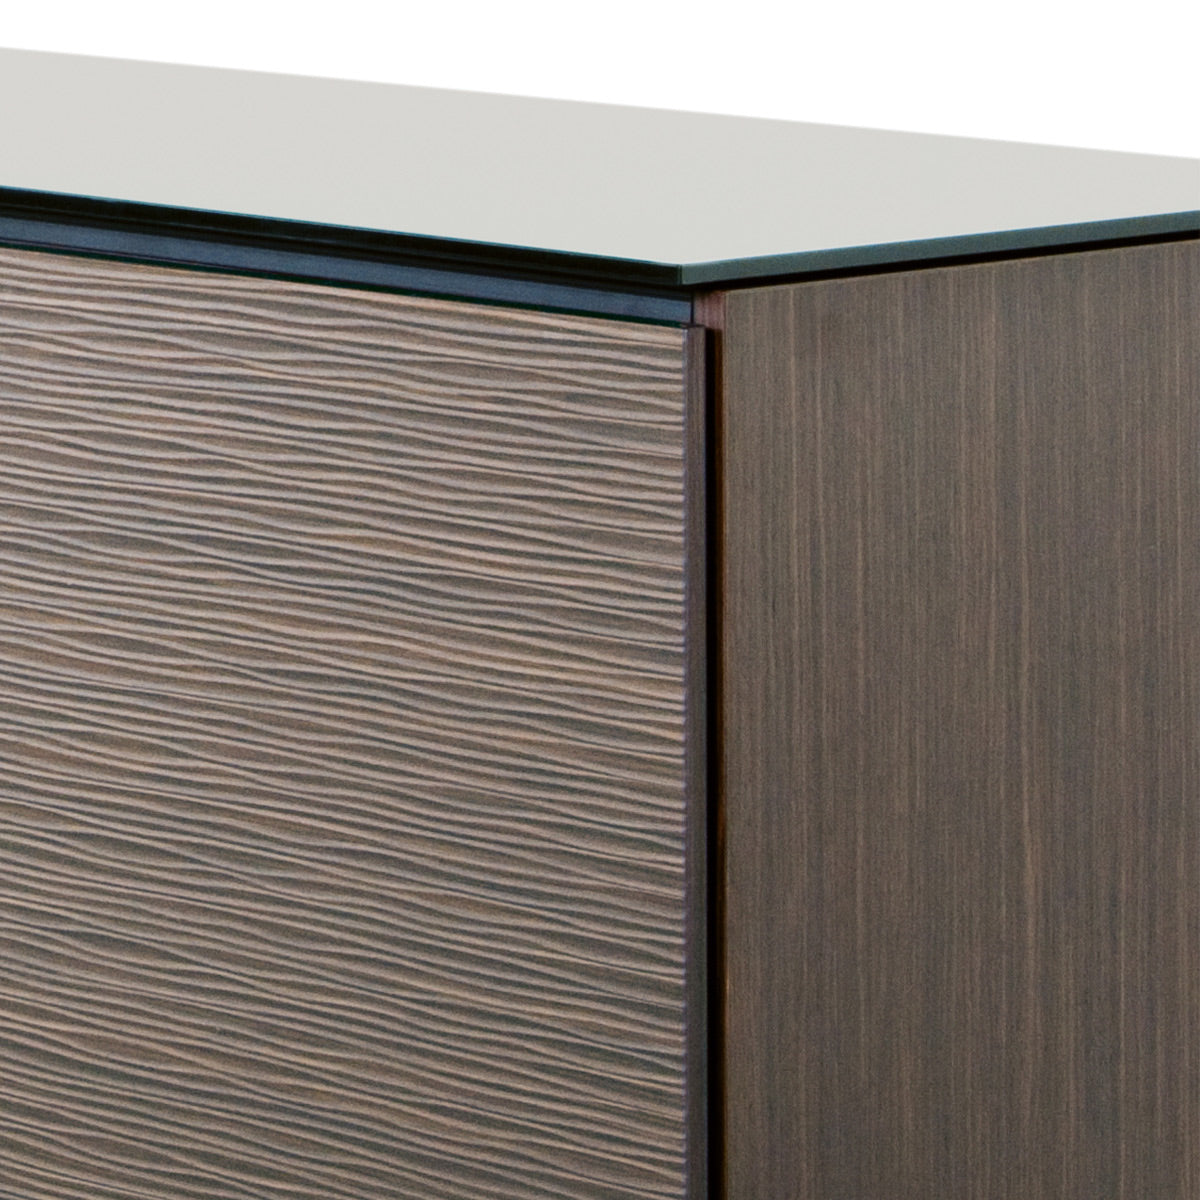 Salamander Chameleon Collection Berlin 329 Twin Speaker Integrated Cabinet (Textured Wenge with Black Glass Top)